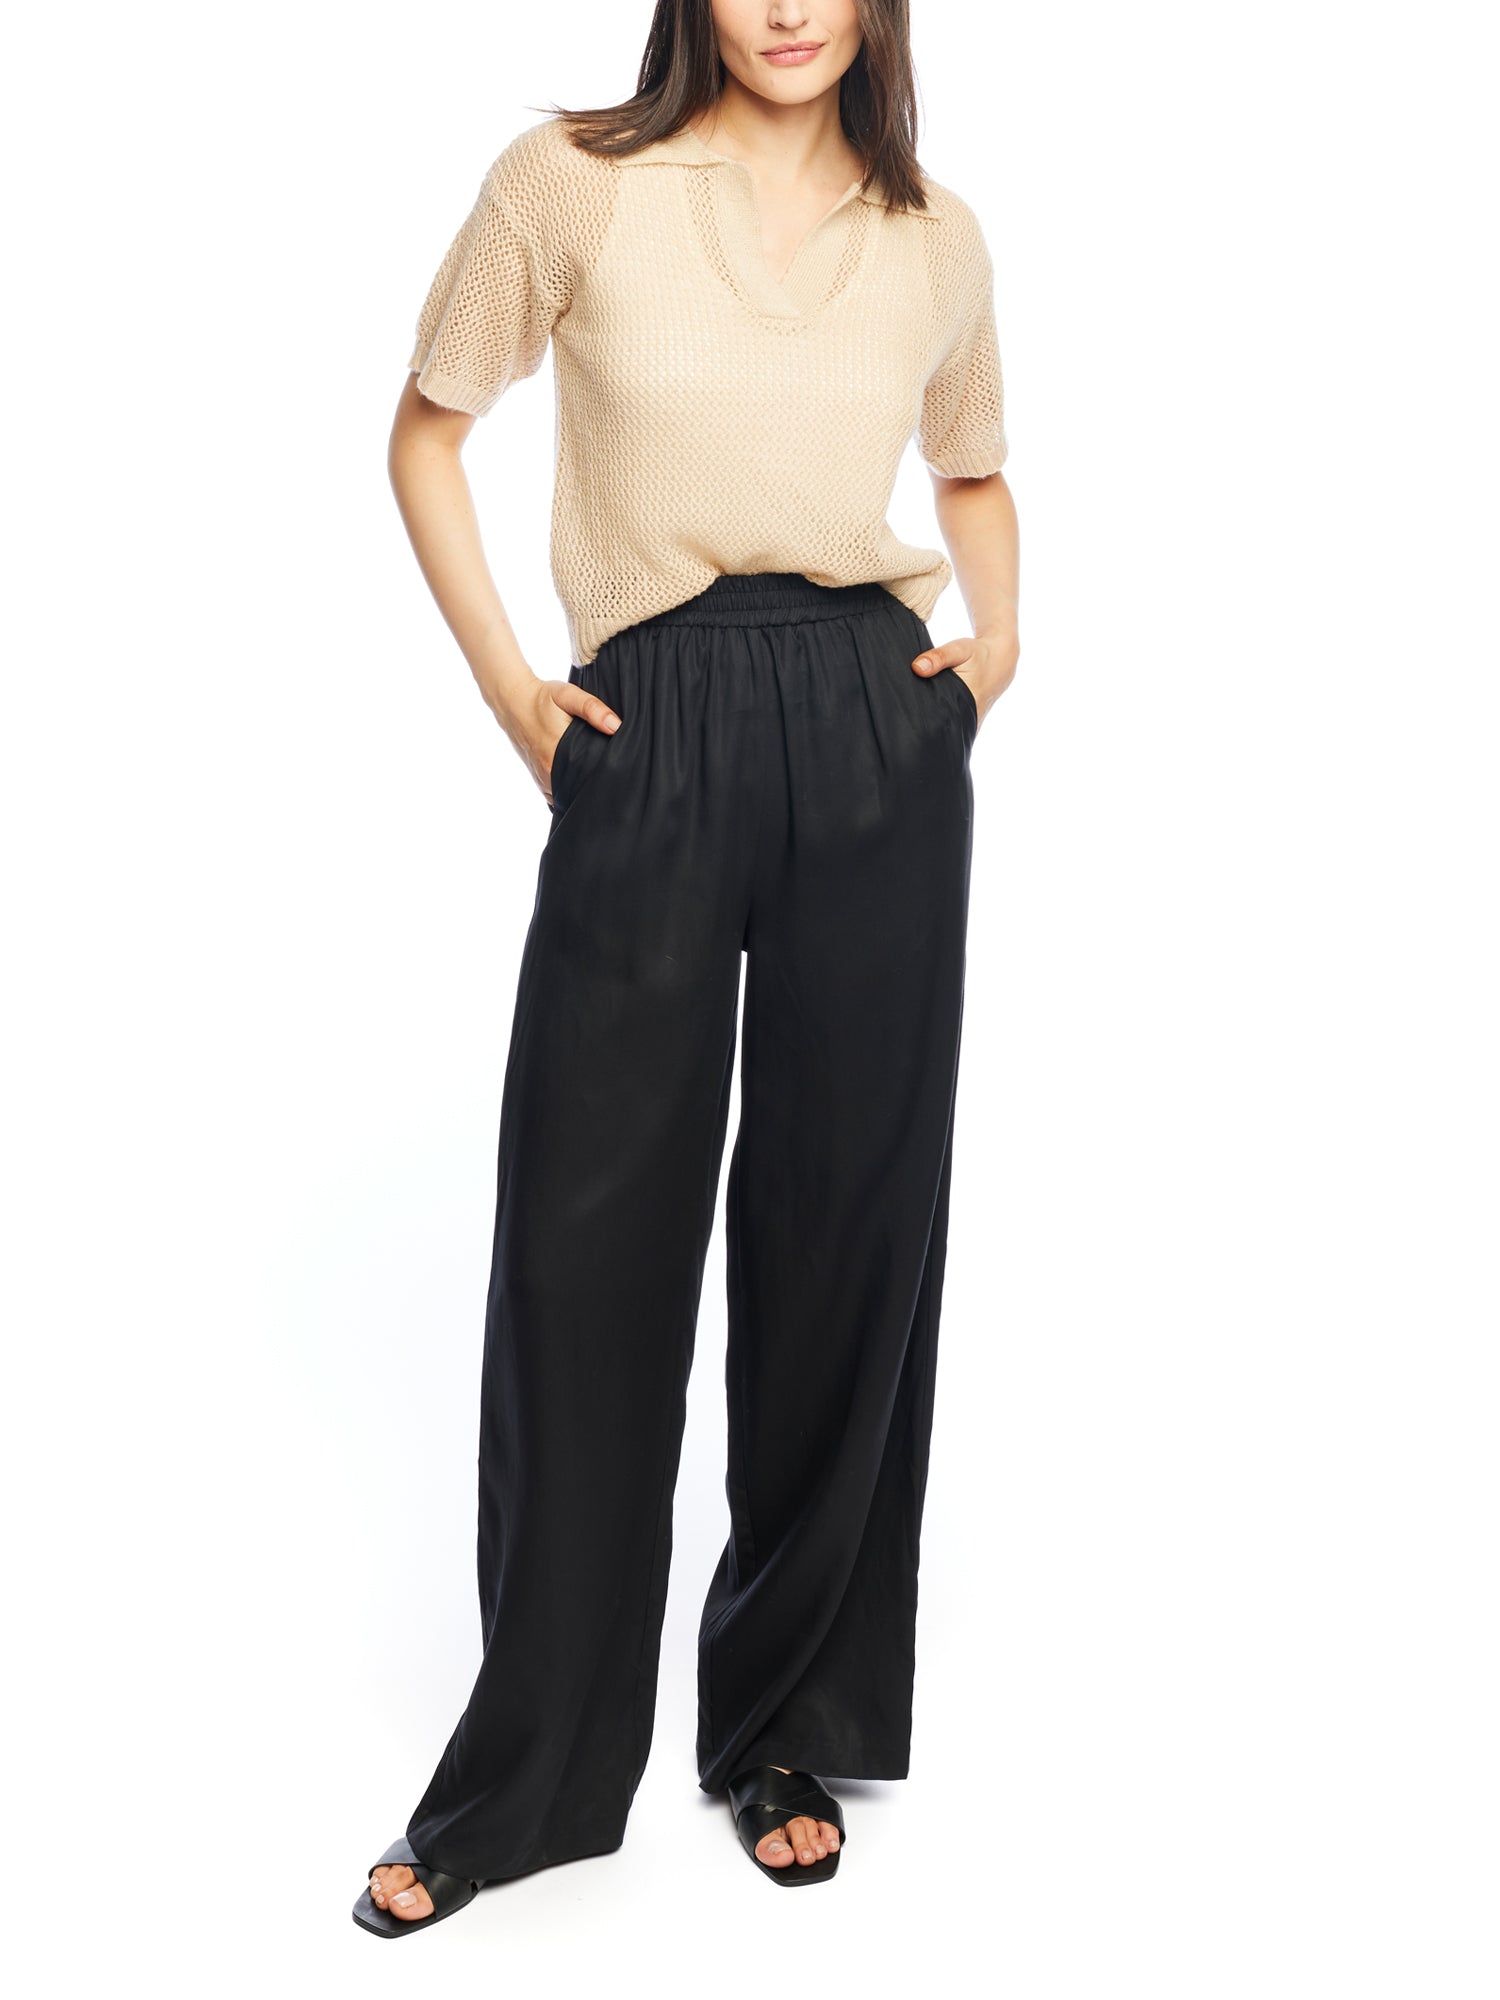 mid-rise wide leg pants with an elasticized waist and easy, relaxed fit in black